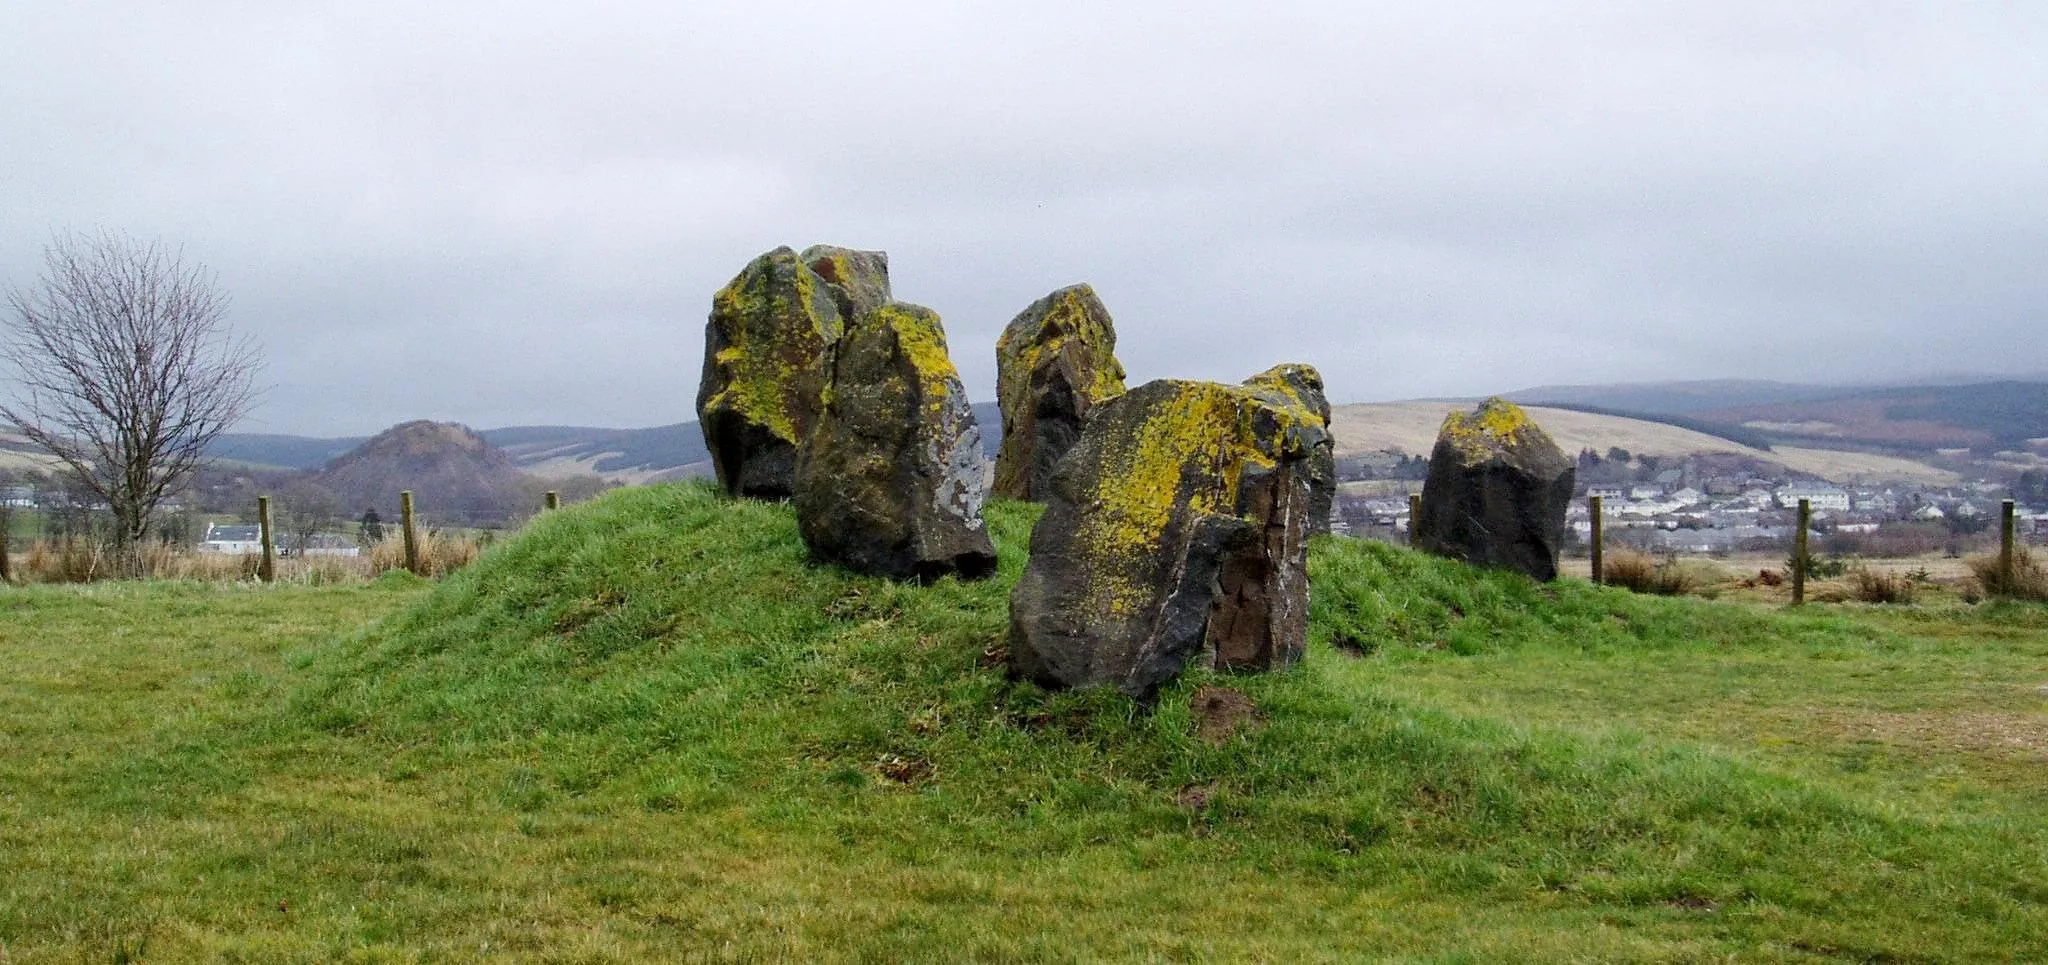 Photo showing: The 7 Standing Stones of Dalmellington. Pennyvenie coal bing visible to the left and Dalmellington itself to the right